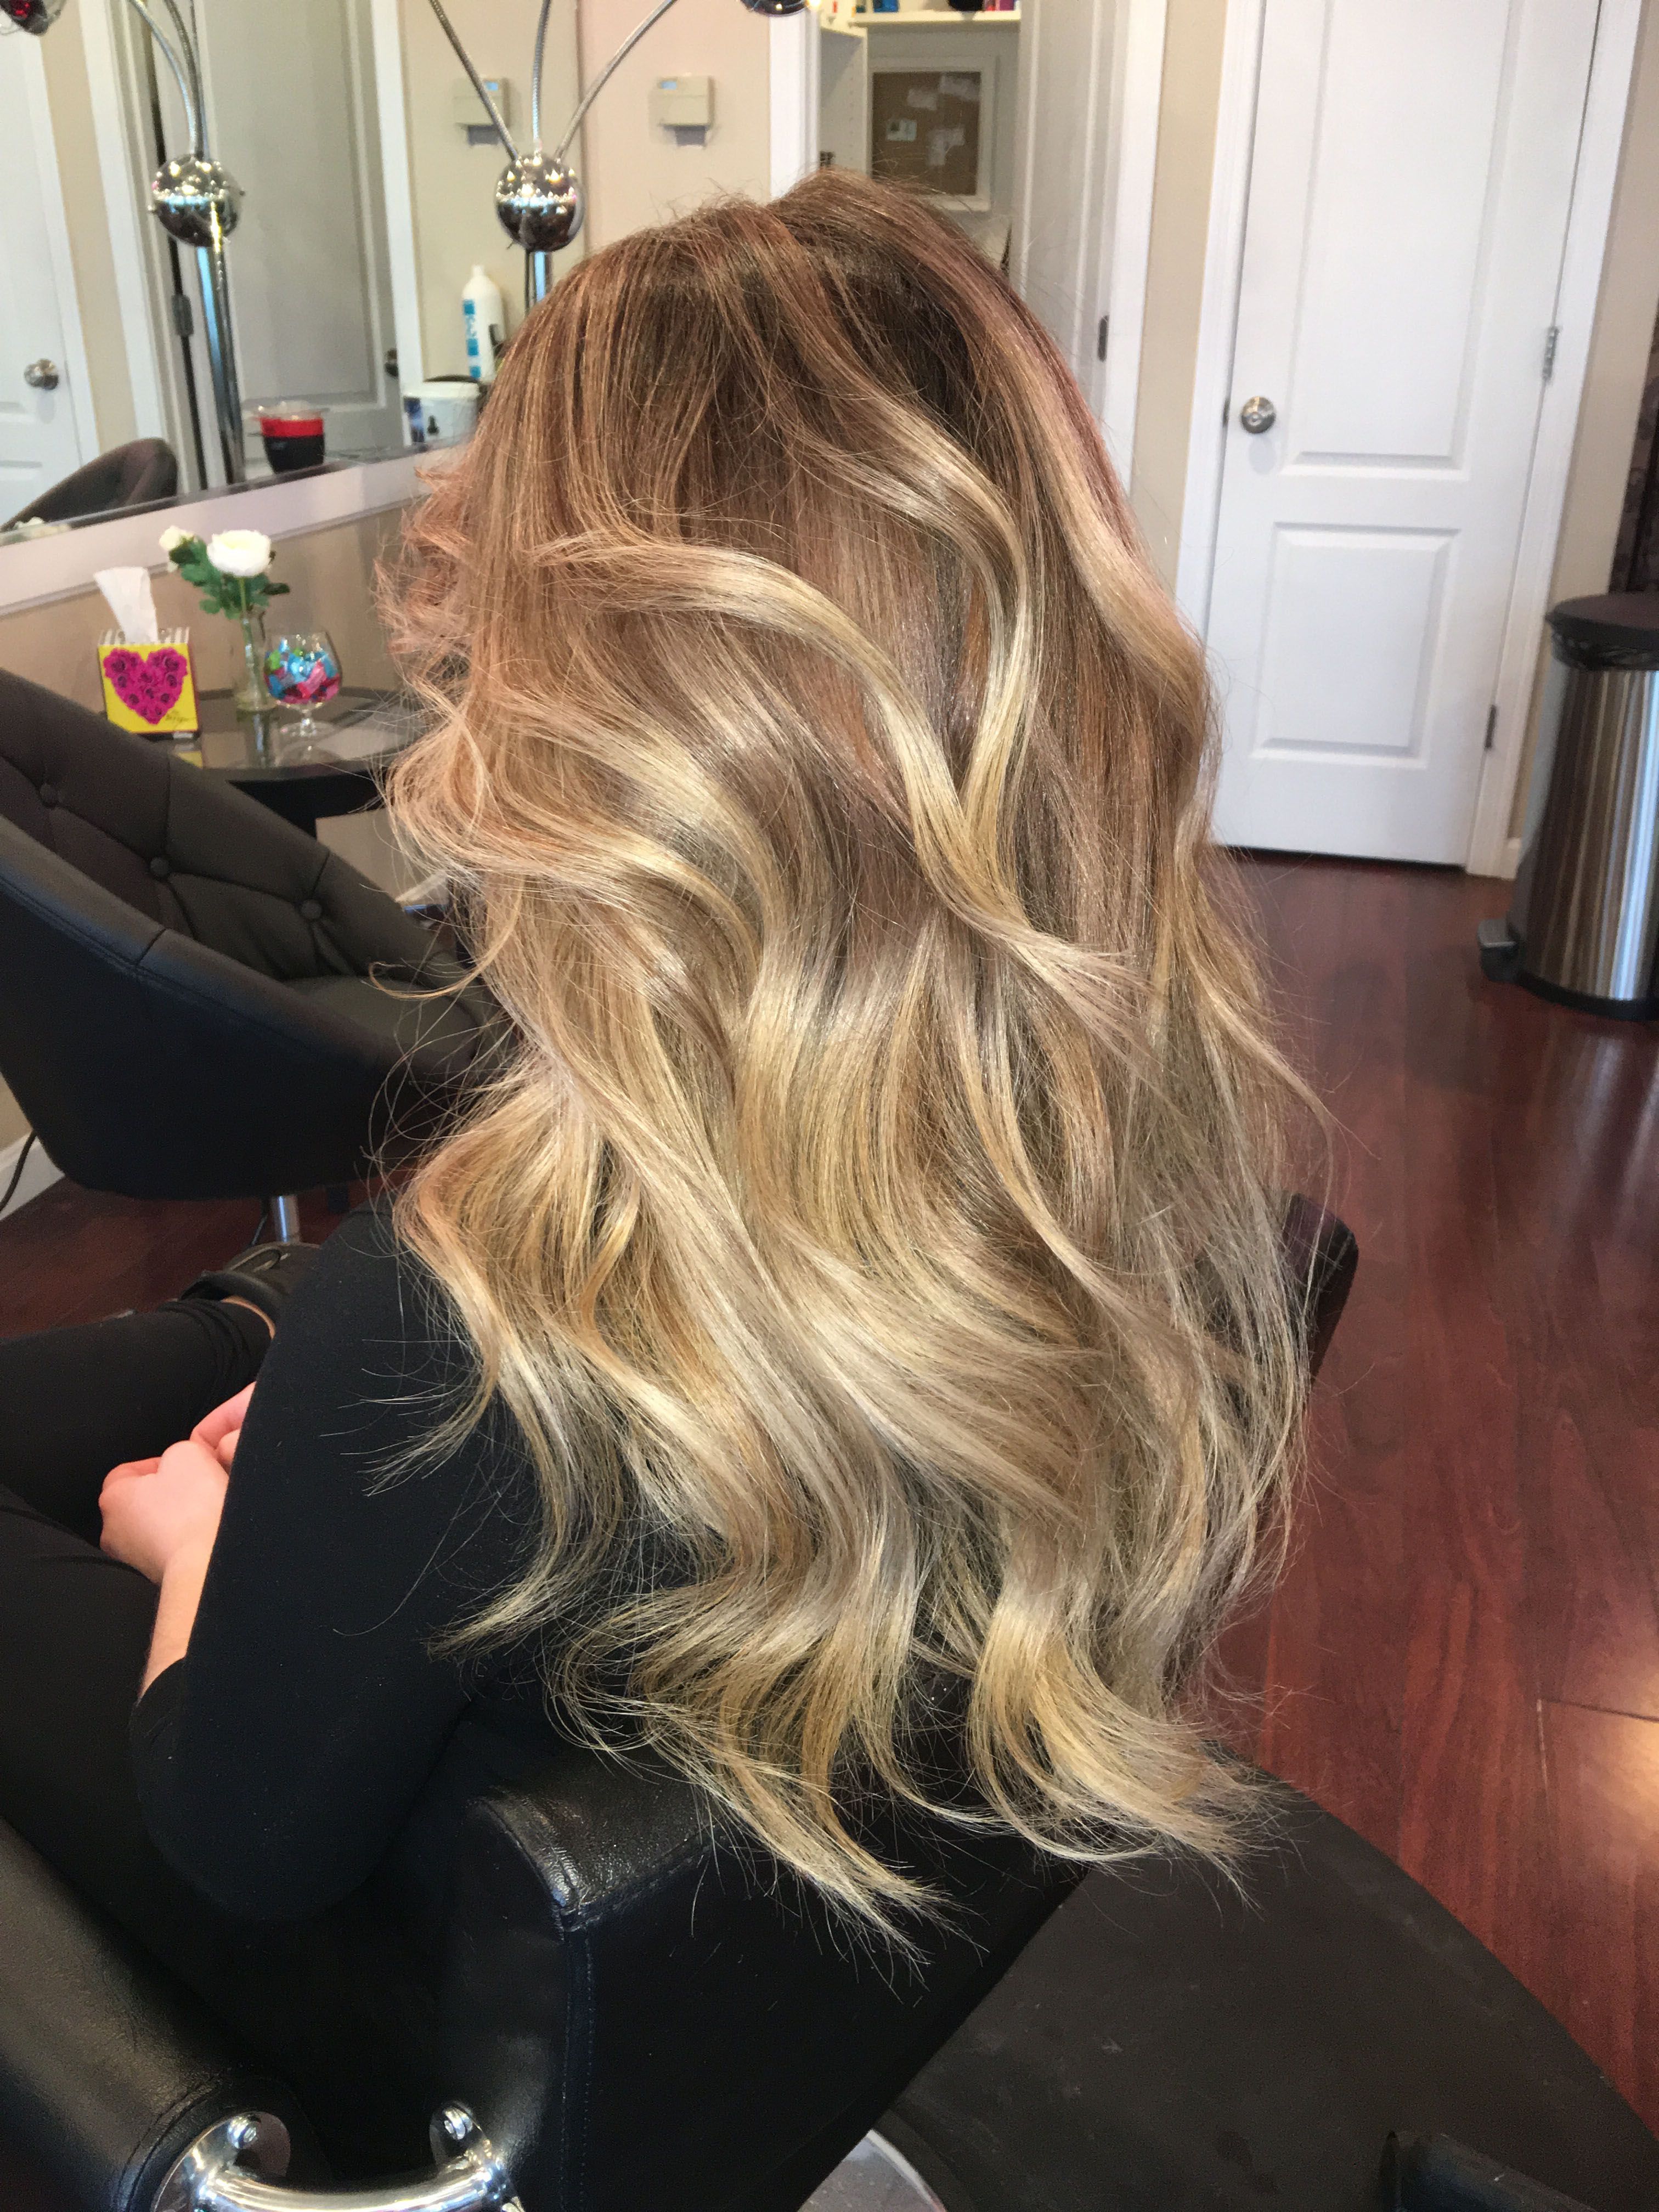 FORMULA: Balayage and Toning For The Perfect Blonde